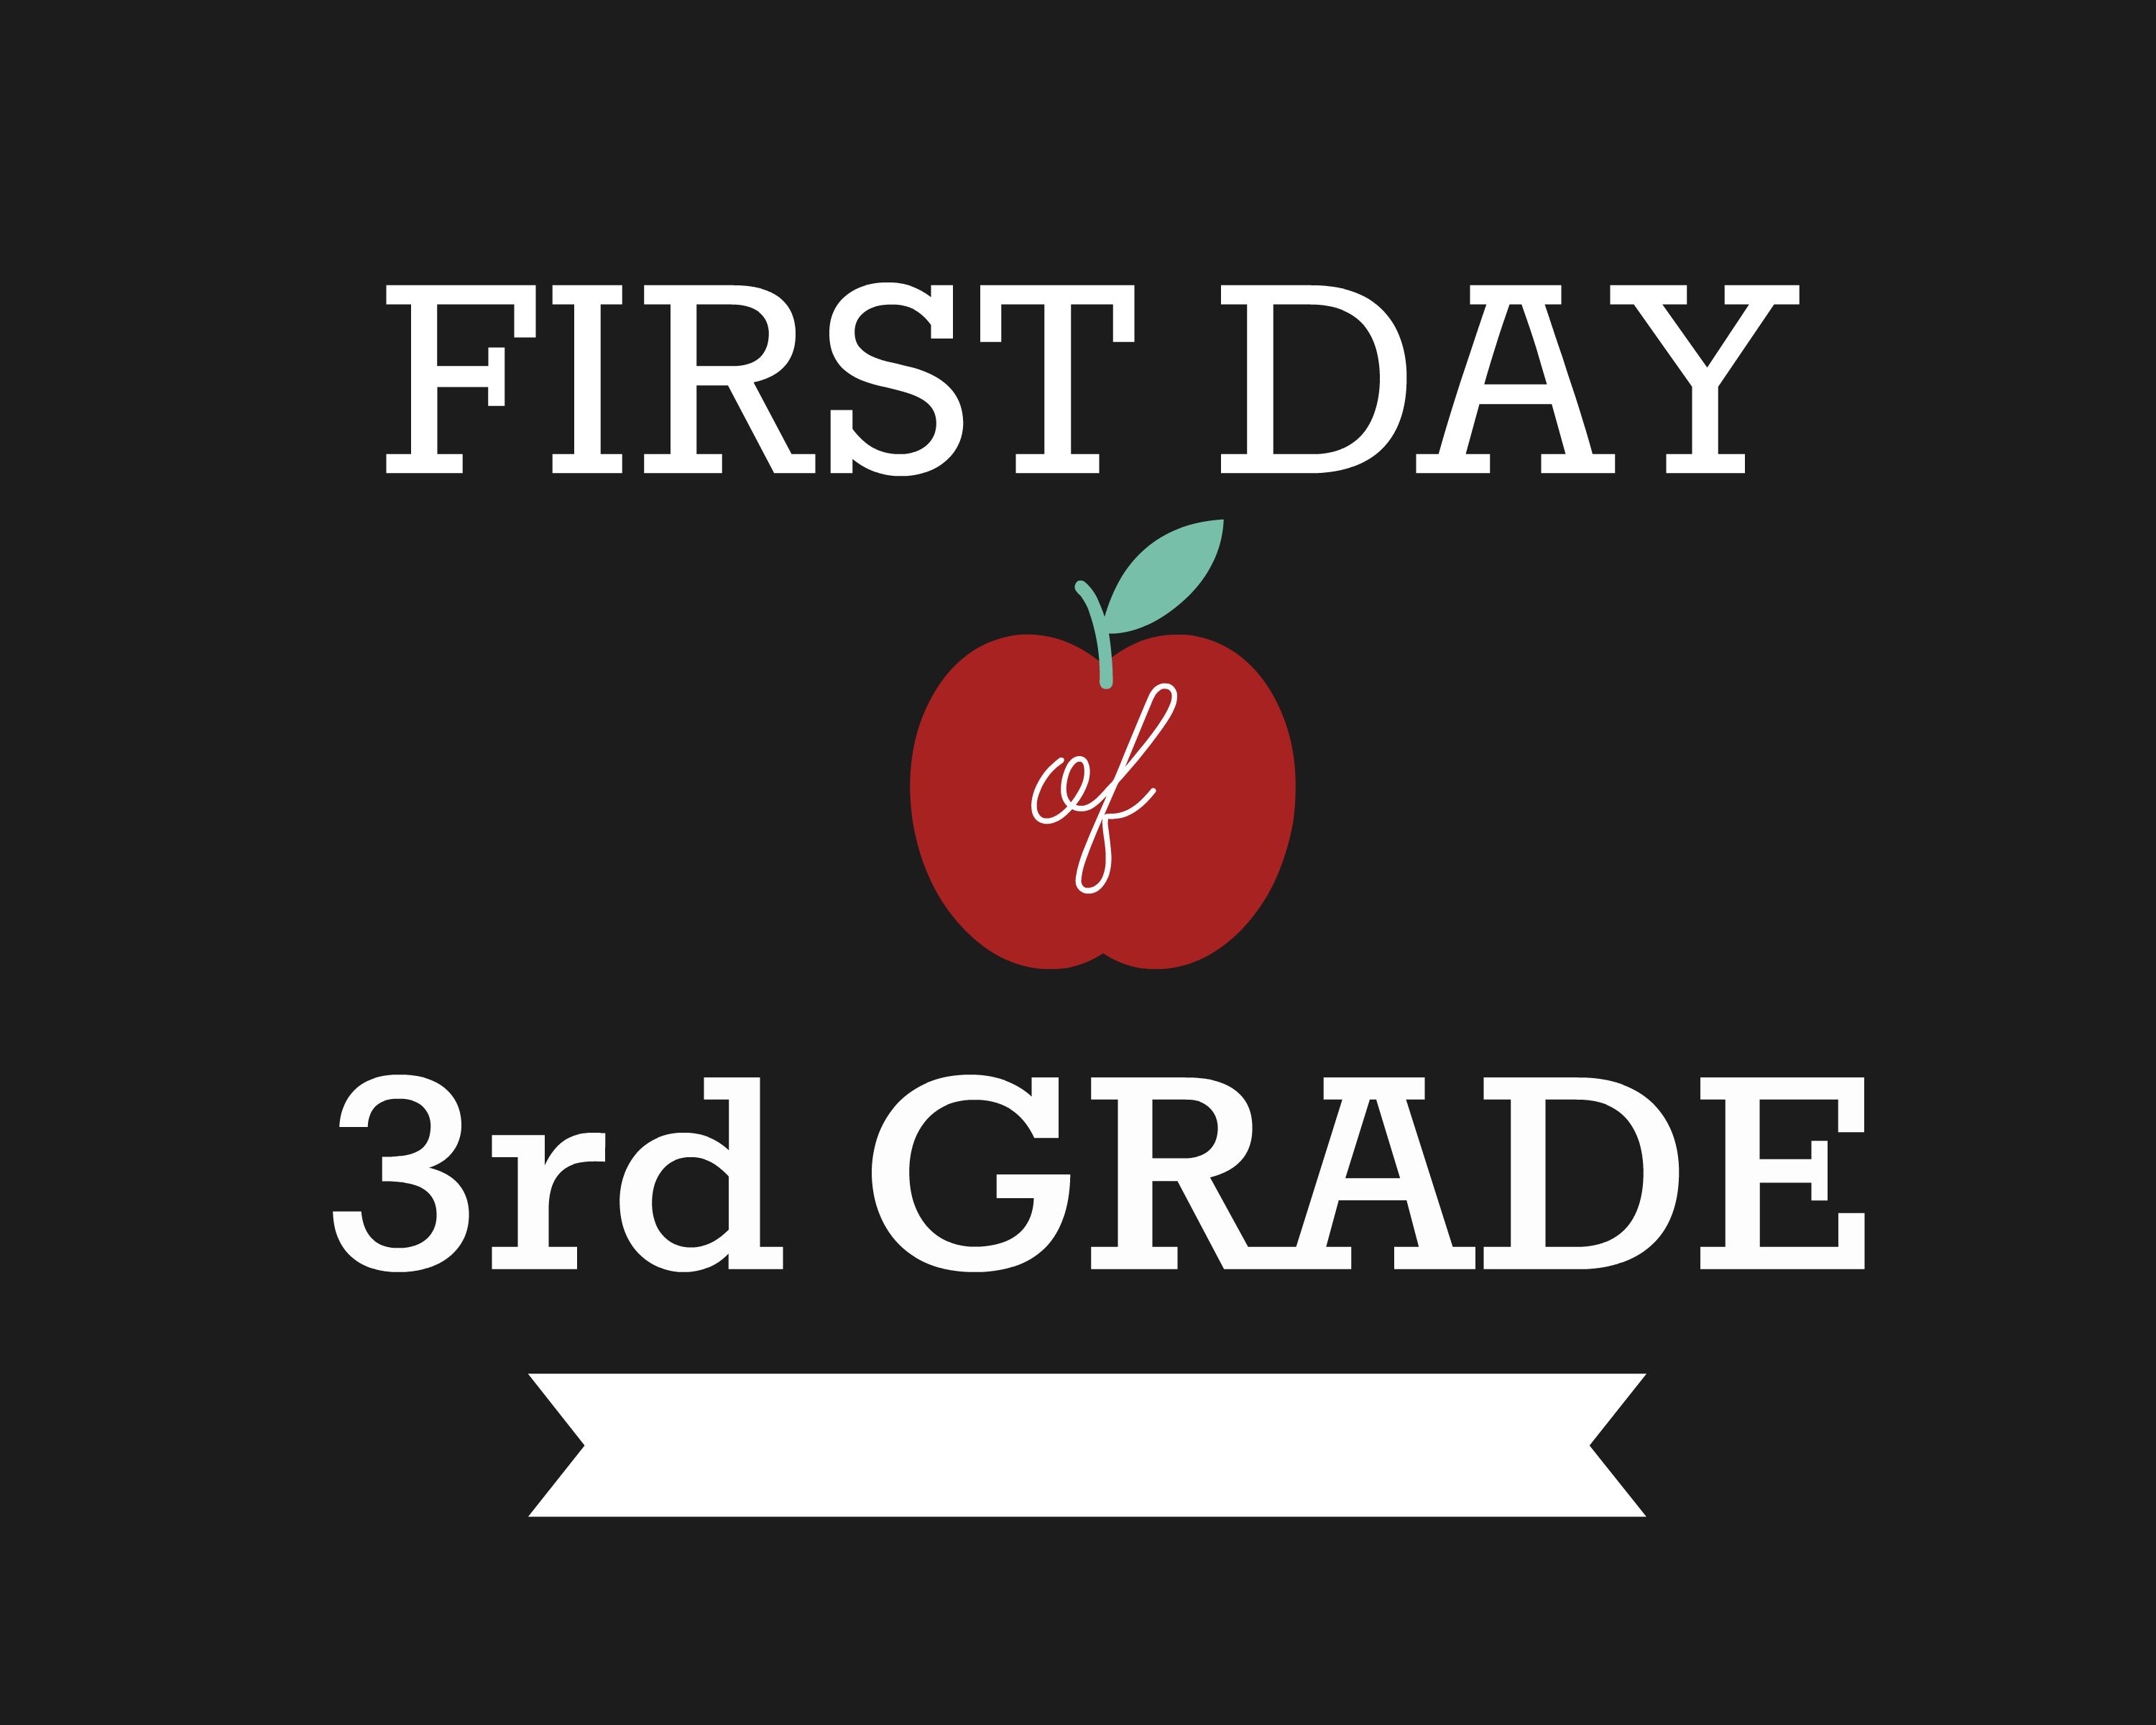 diy-first-day-of-school-signs-ruler-craft-pre-k-up-to-grade-12